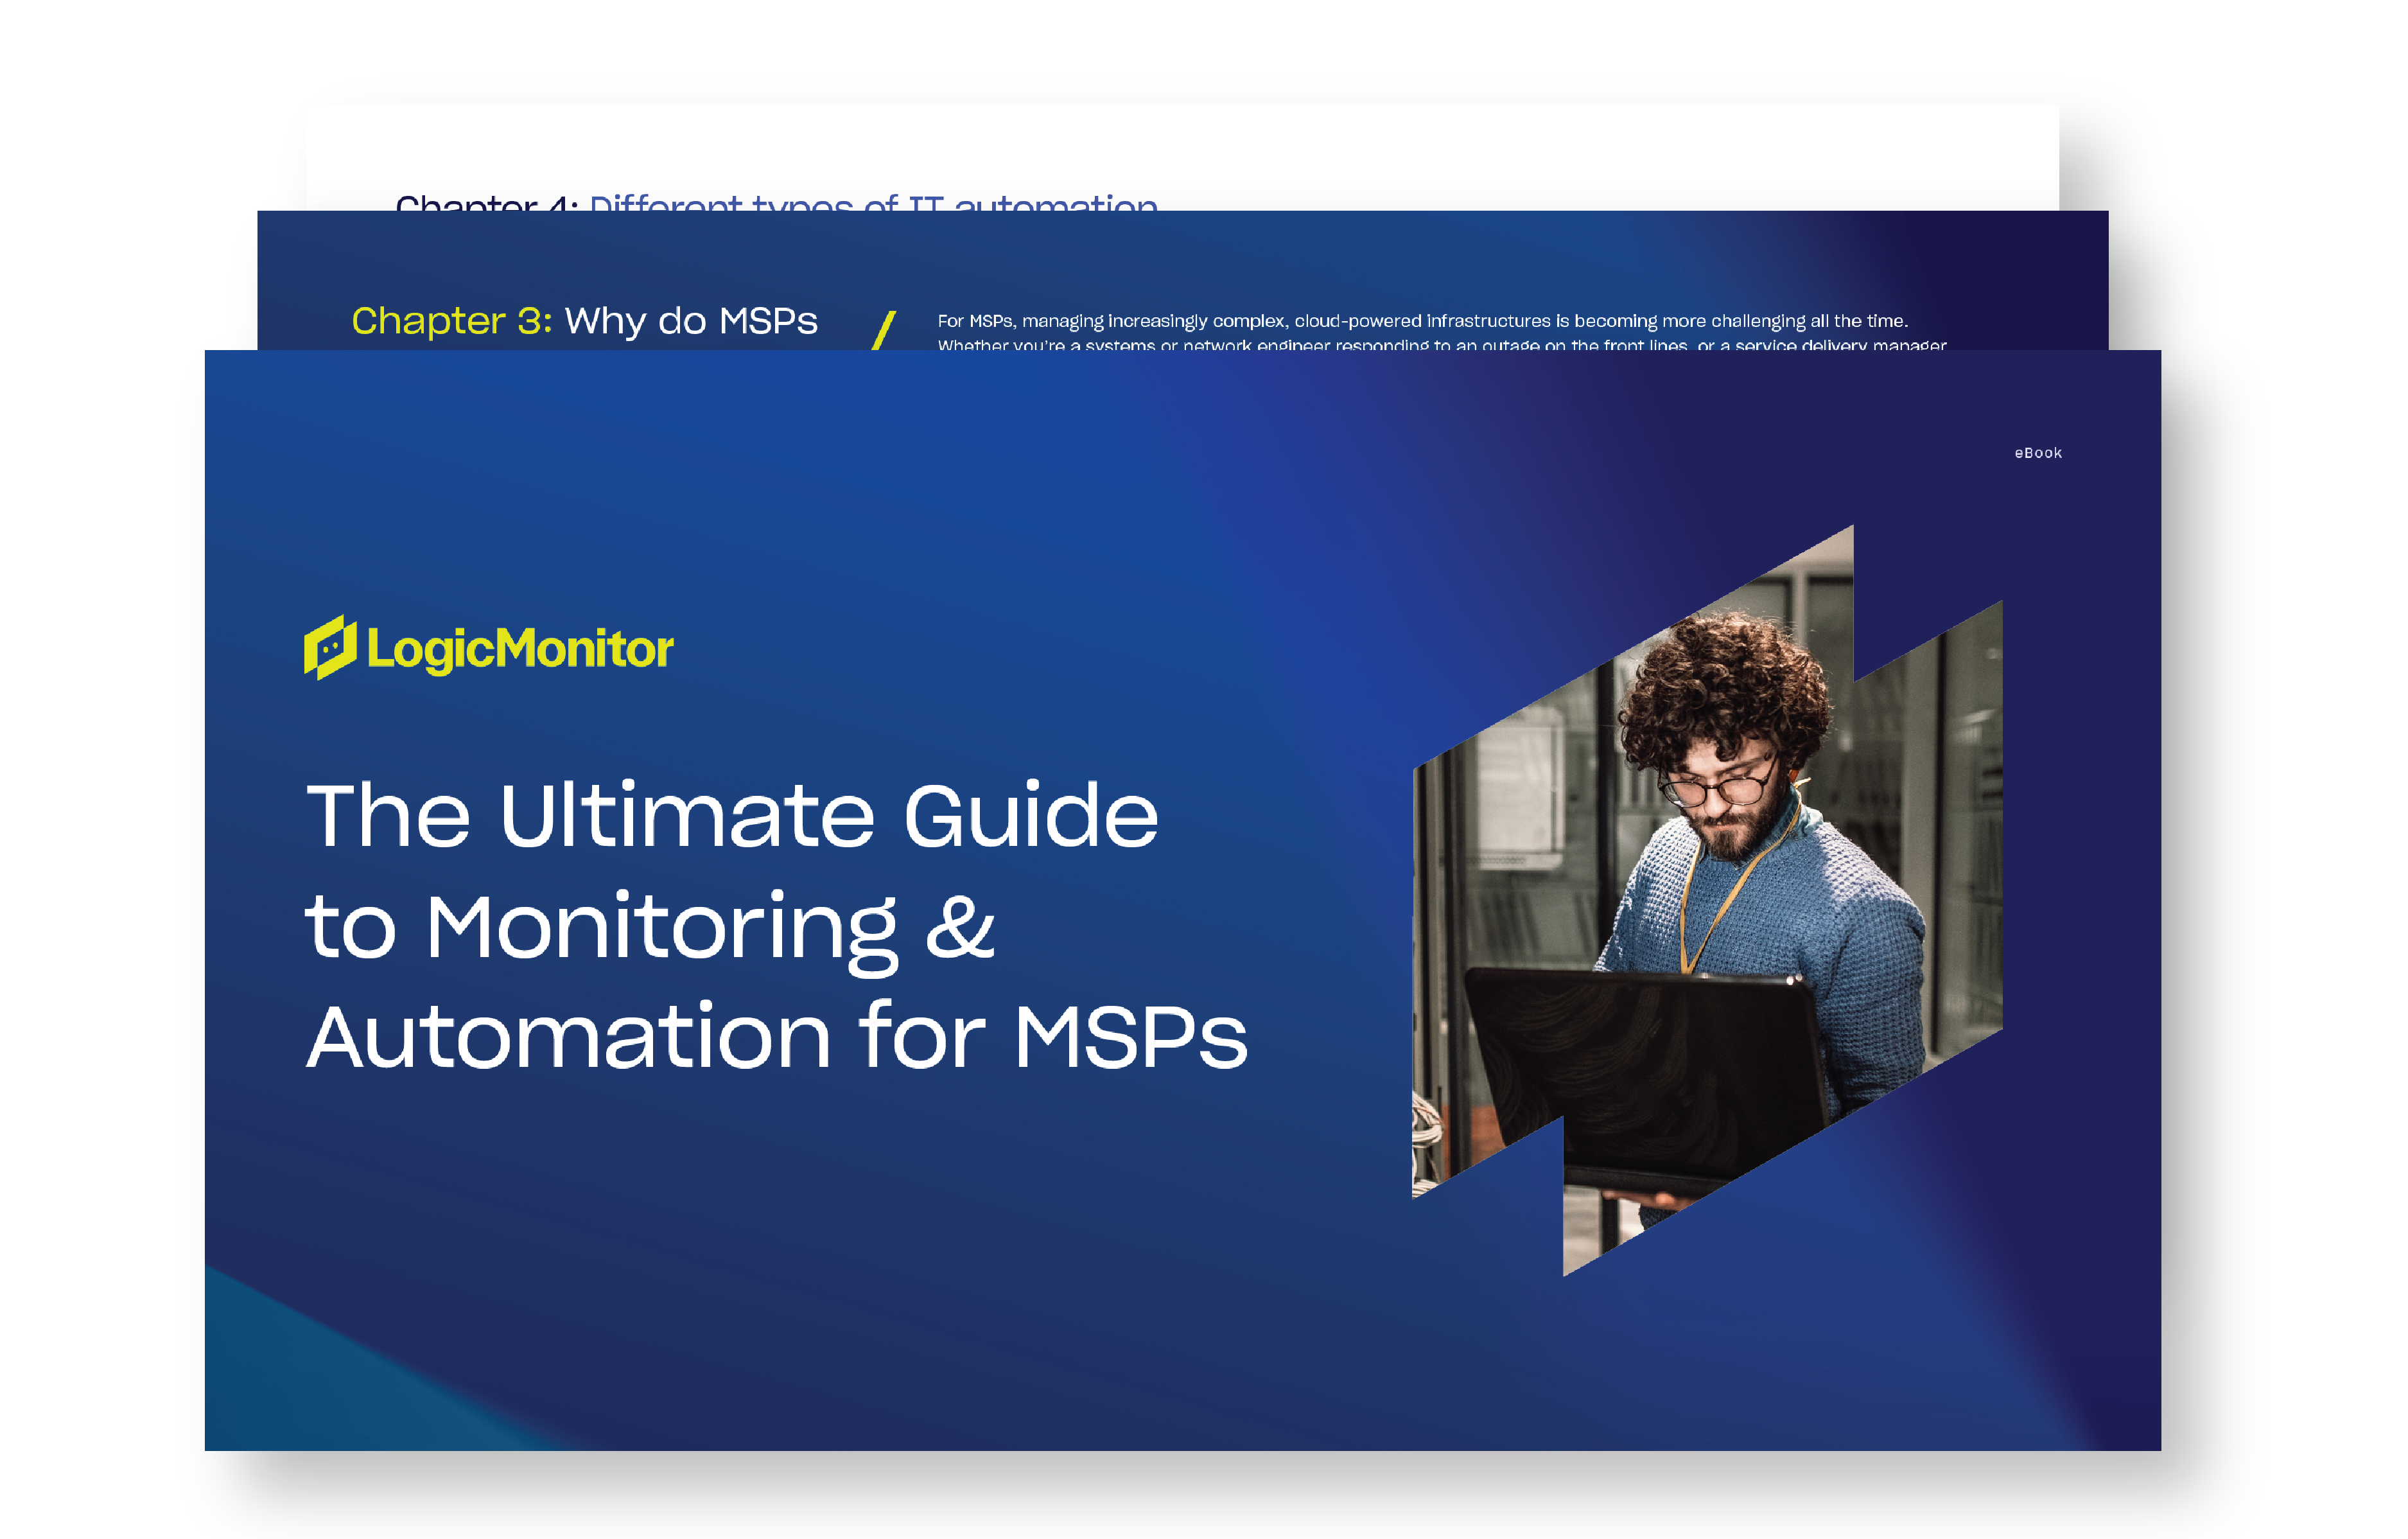 Monitoring&Automation_ebook_v2 featured image